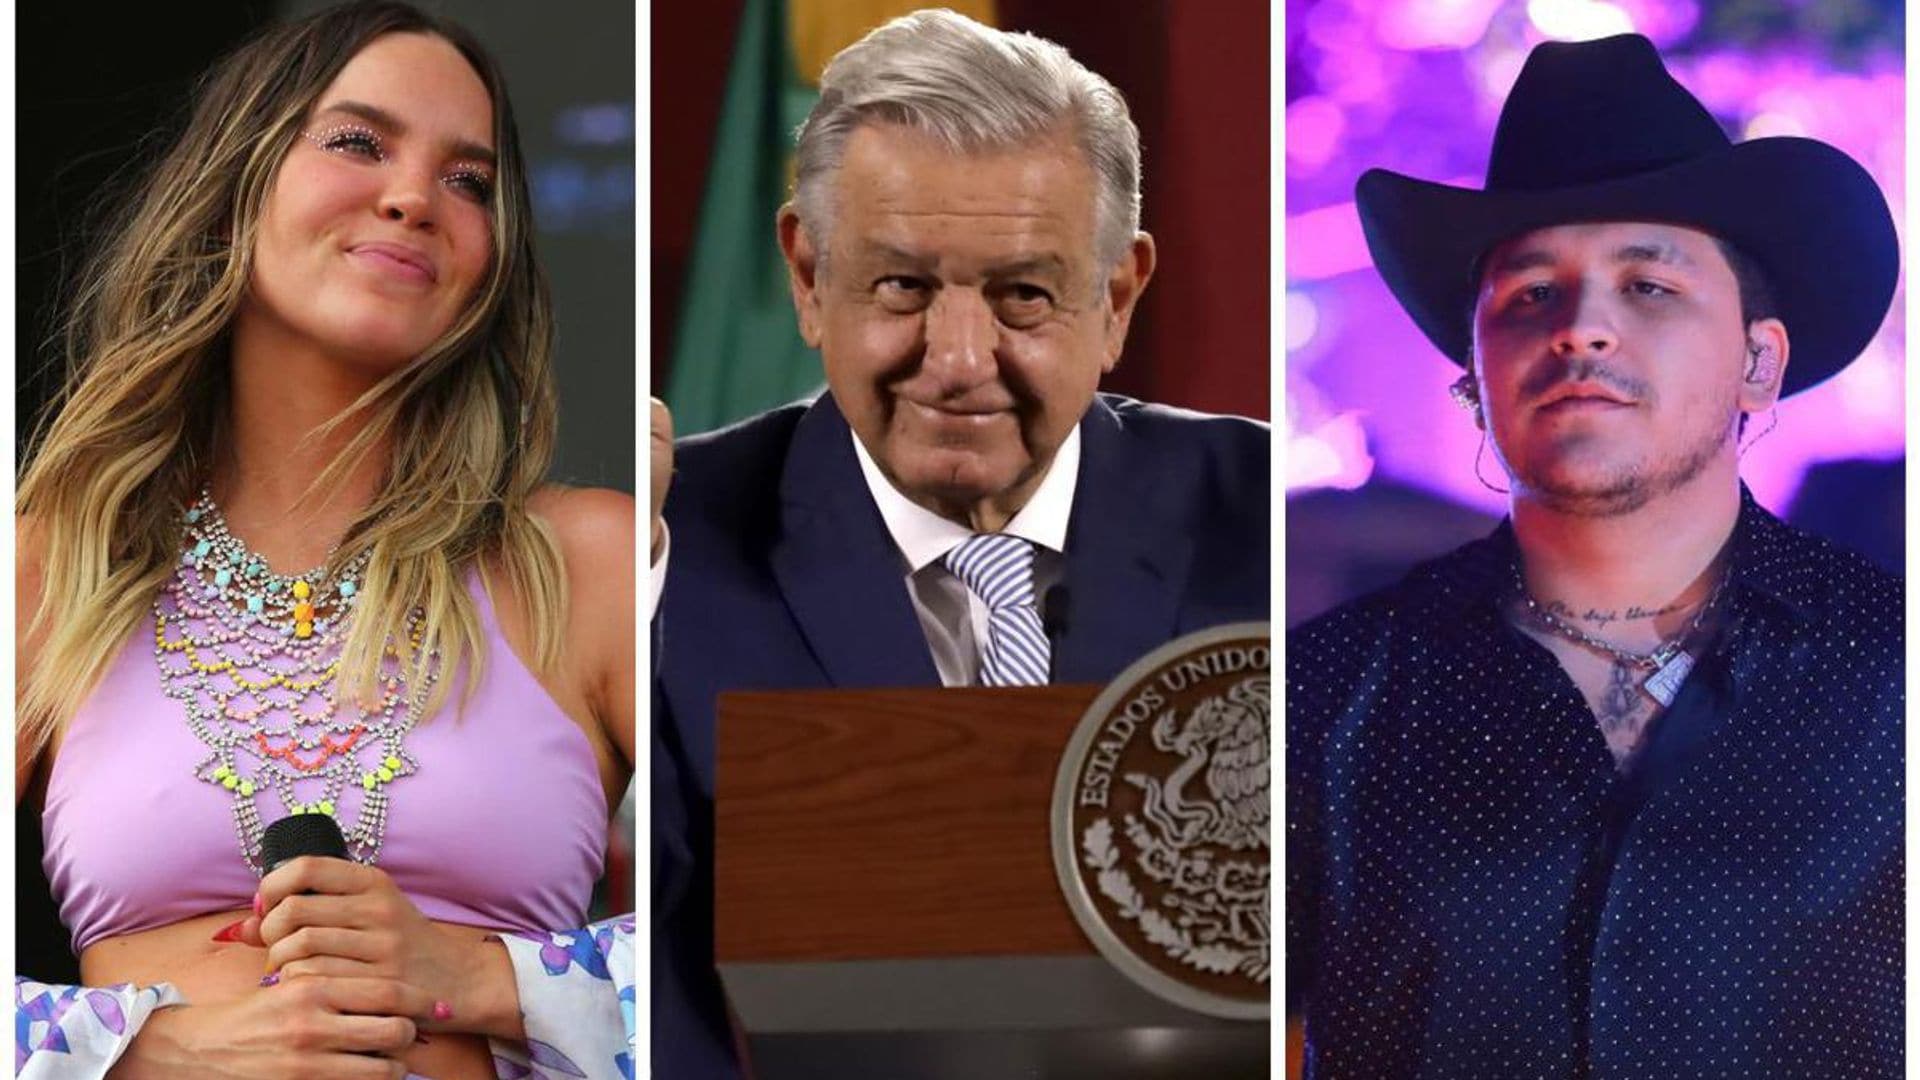 Mexico’s president wants to reunite exes Belinda and Christian Nodal in a massive free concert at the Zócalo